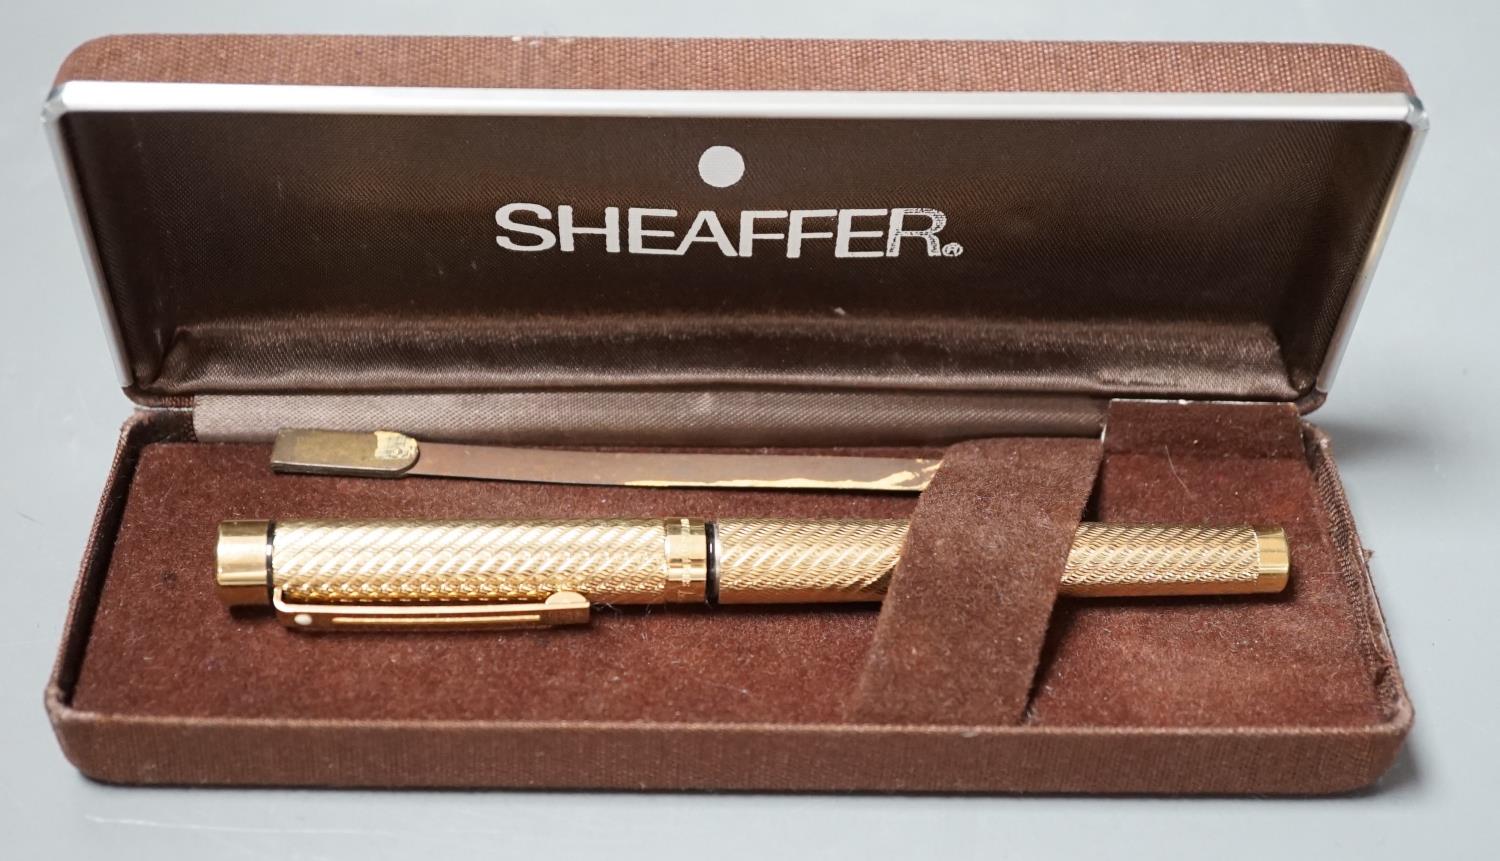 A cased gold plated Shaeffer fountain pen